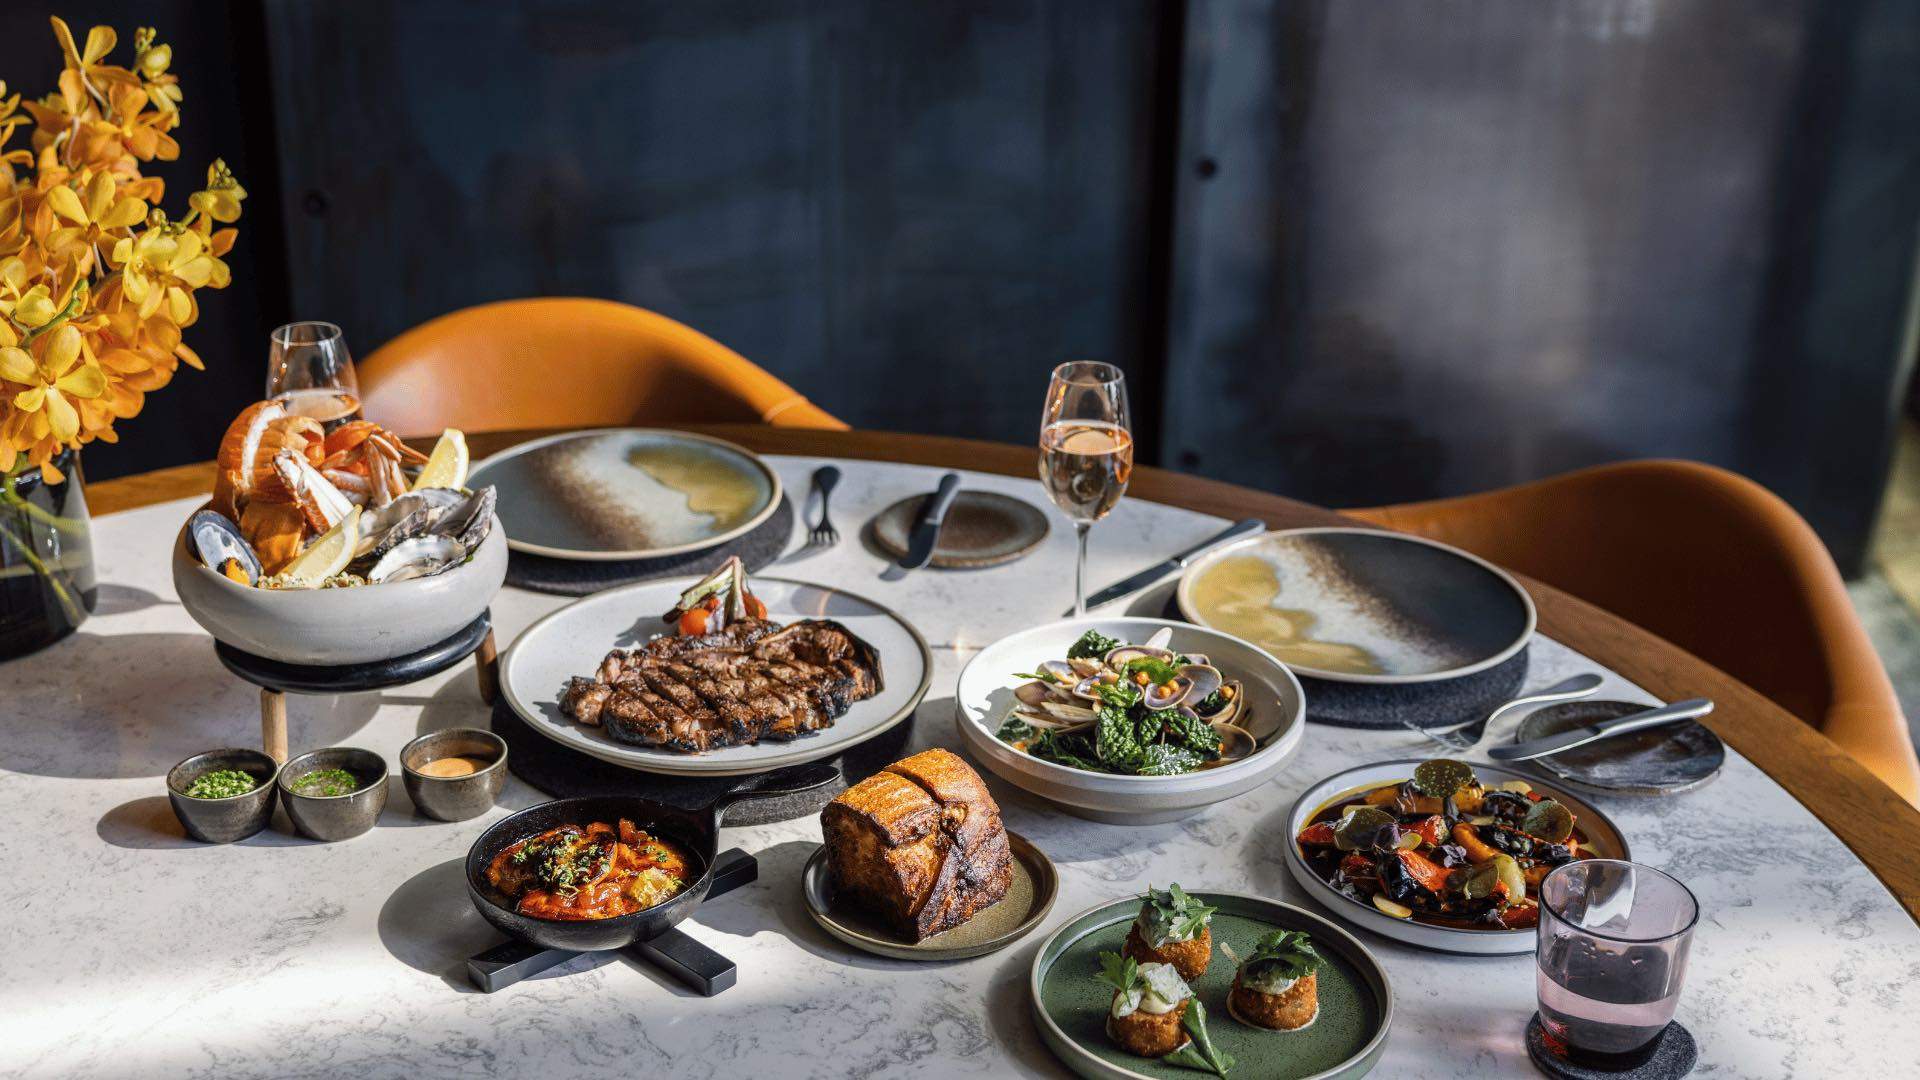 Order Up: Here's Everything We Would Get for Lunch at Crown Sydney